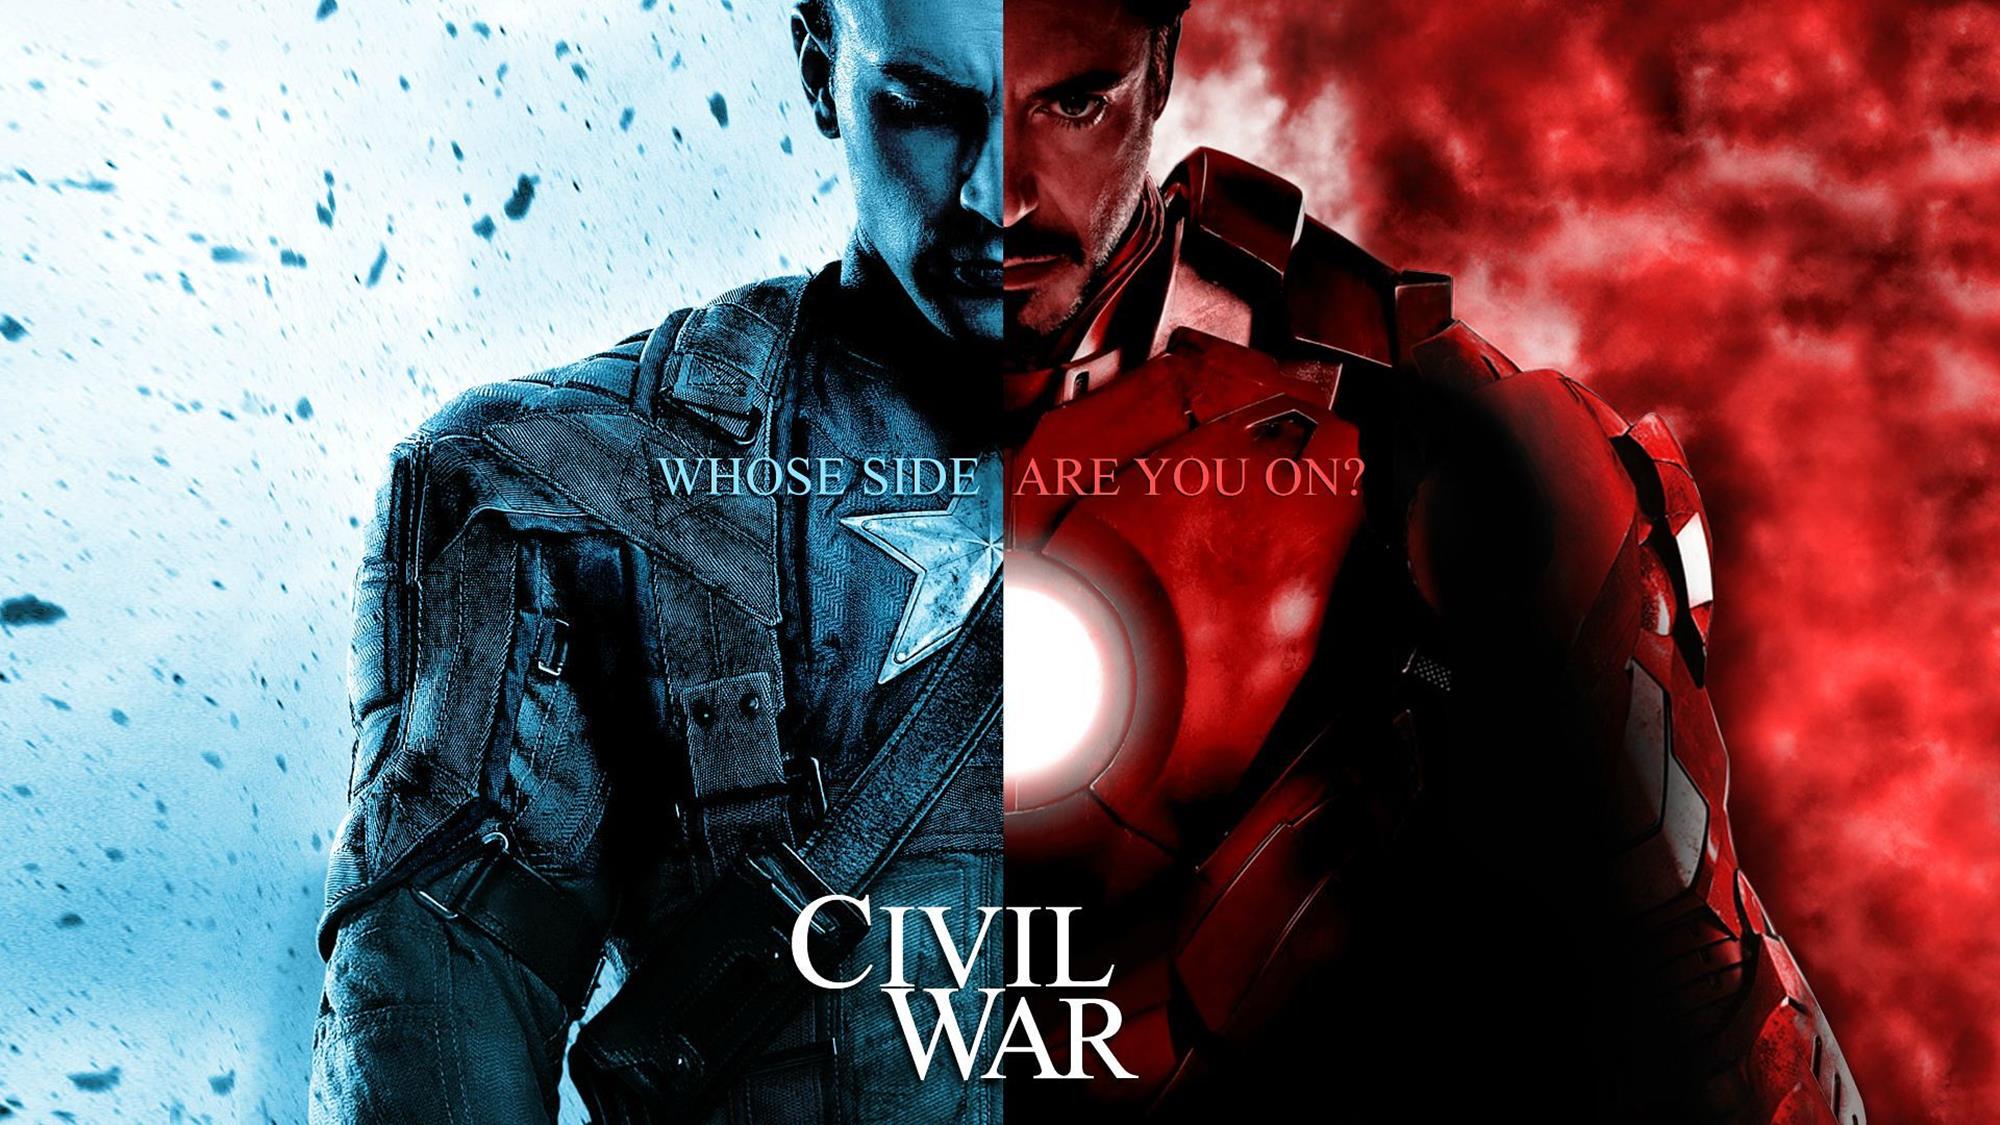 h20wkj2-iron-man-vs-captain-america-who-sides-with-who-in-marvel-s-civil-war-jpeg-151871 (Copy)